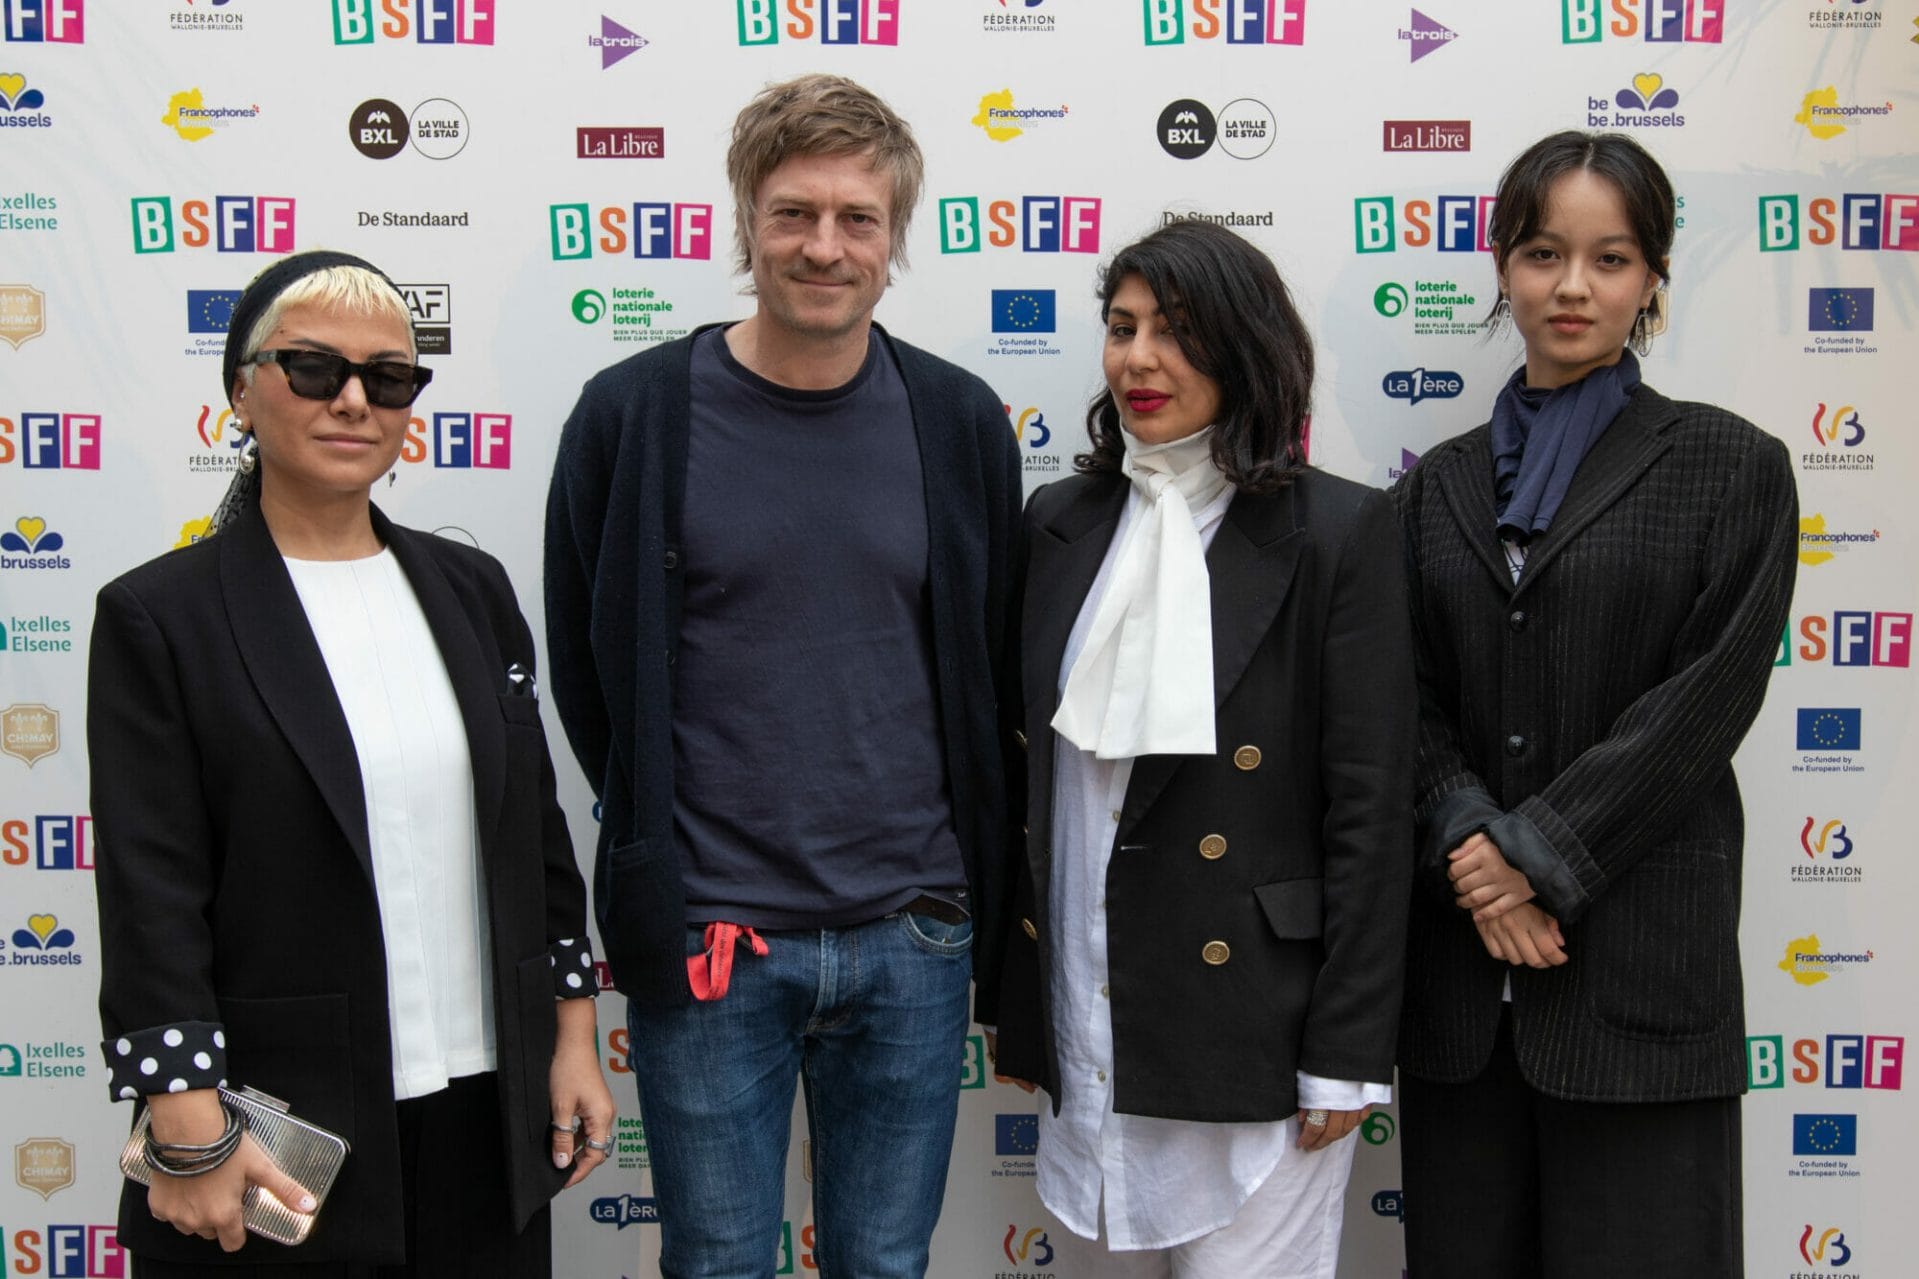 BSFF 2023 - Day 11 - Closing Ceremony - International Competition Jury : Farnoosh Samadi, Bahar Pars, Antoine Wielemans, Lucie Zhang